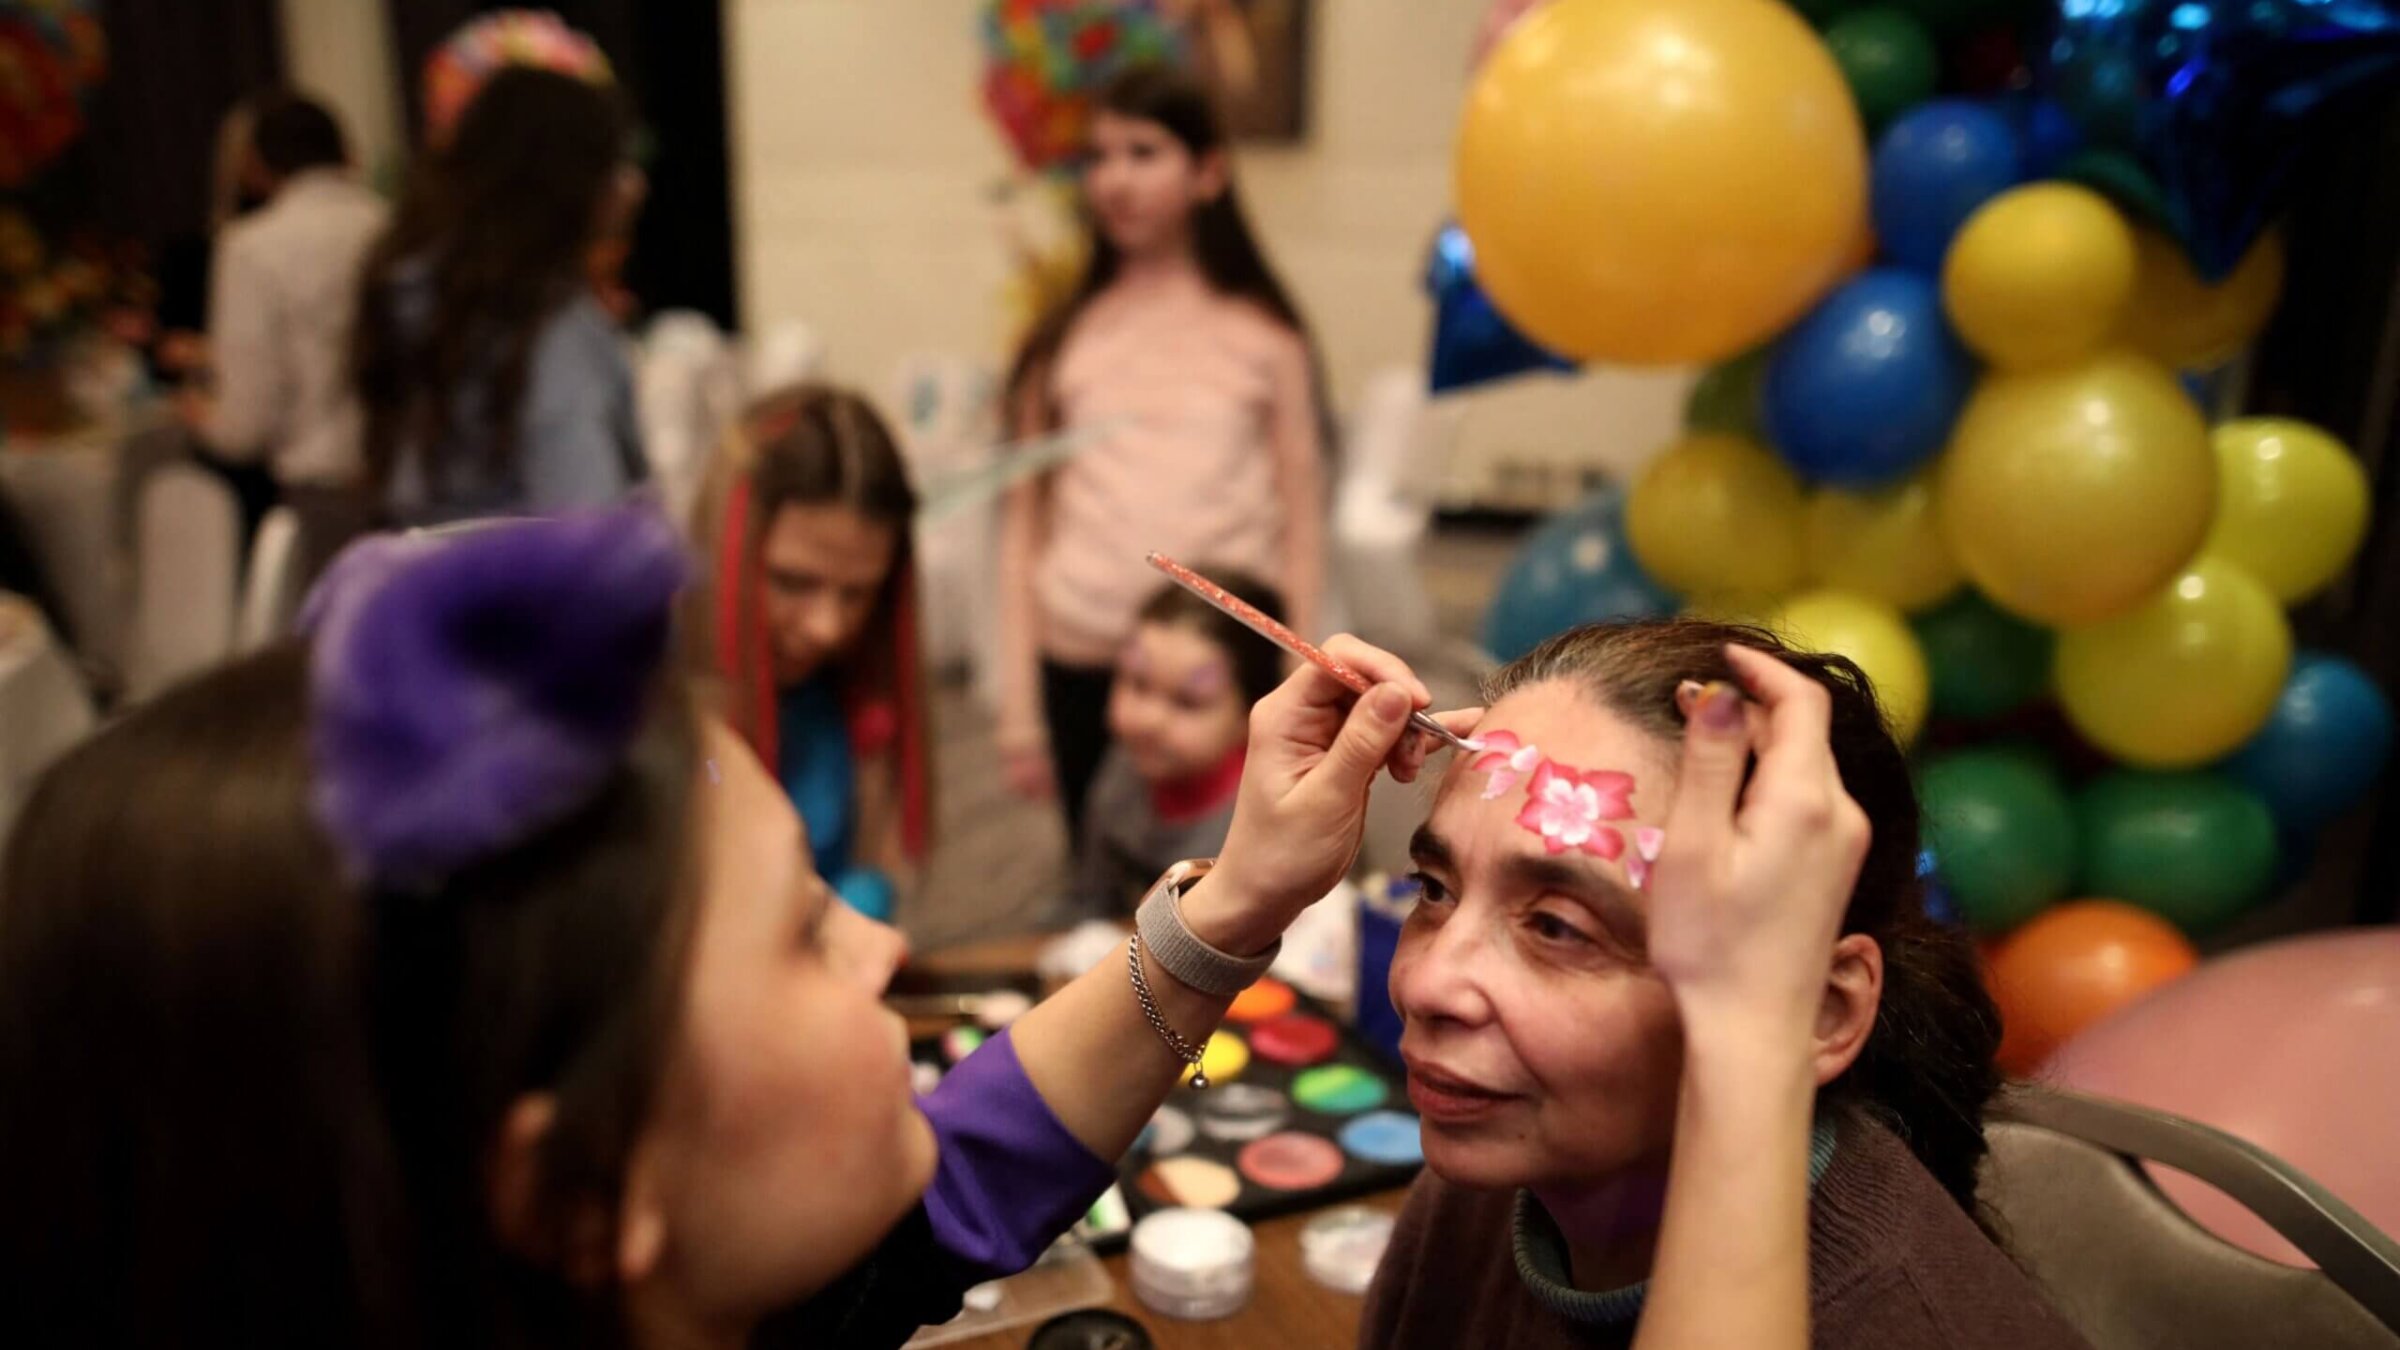 Ukrainian Jewish refugees who fled the war celebrate the Jewish holiday of Purim at Chabad-Lubavitch synagogue in Chisinau on March 16, 2022. 